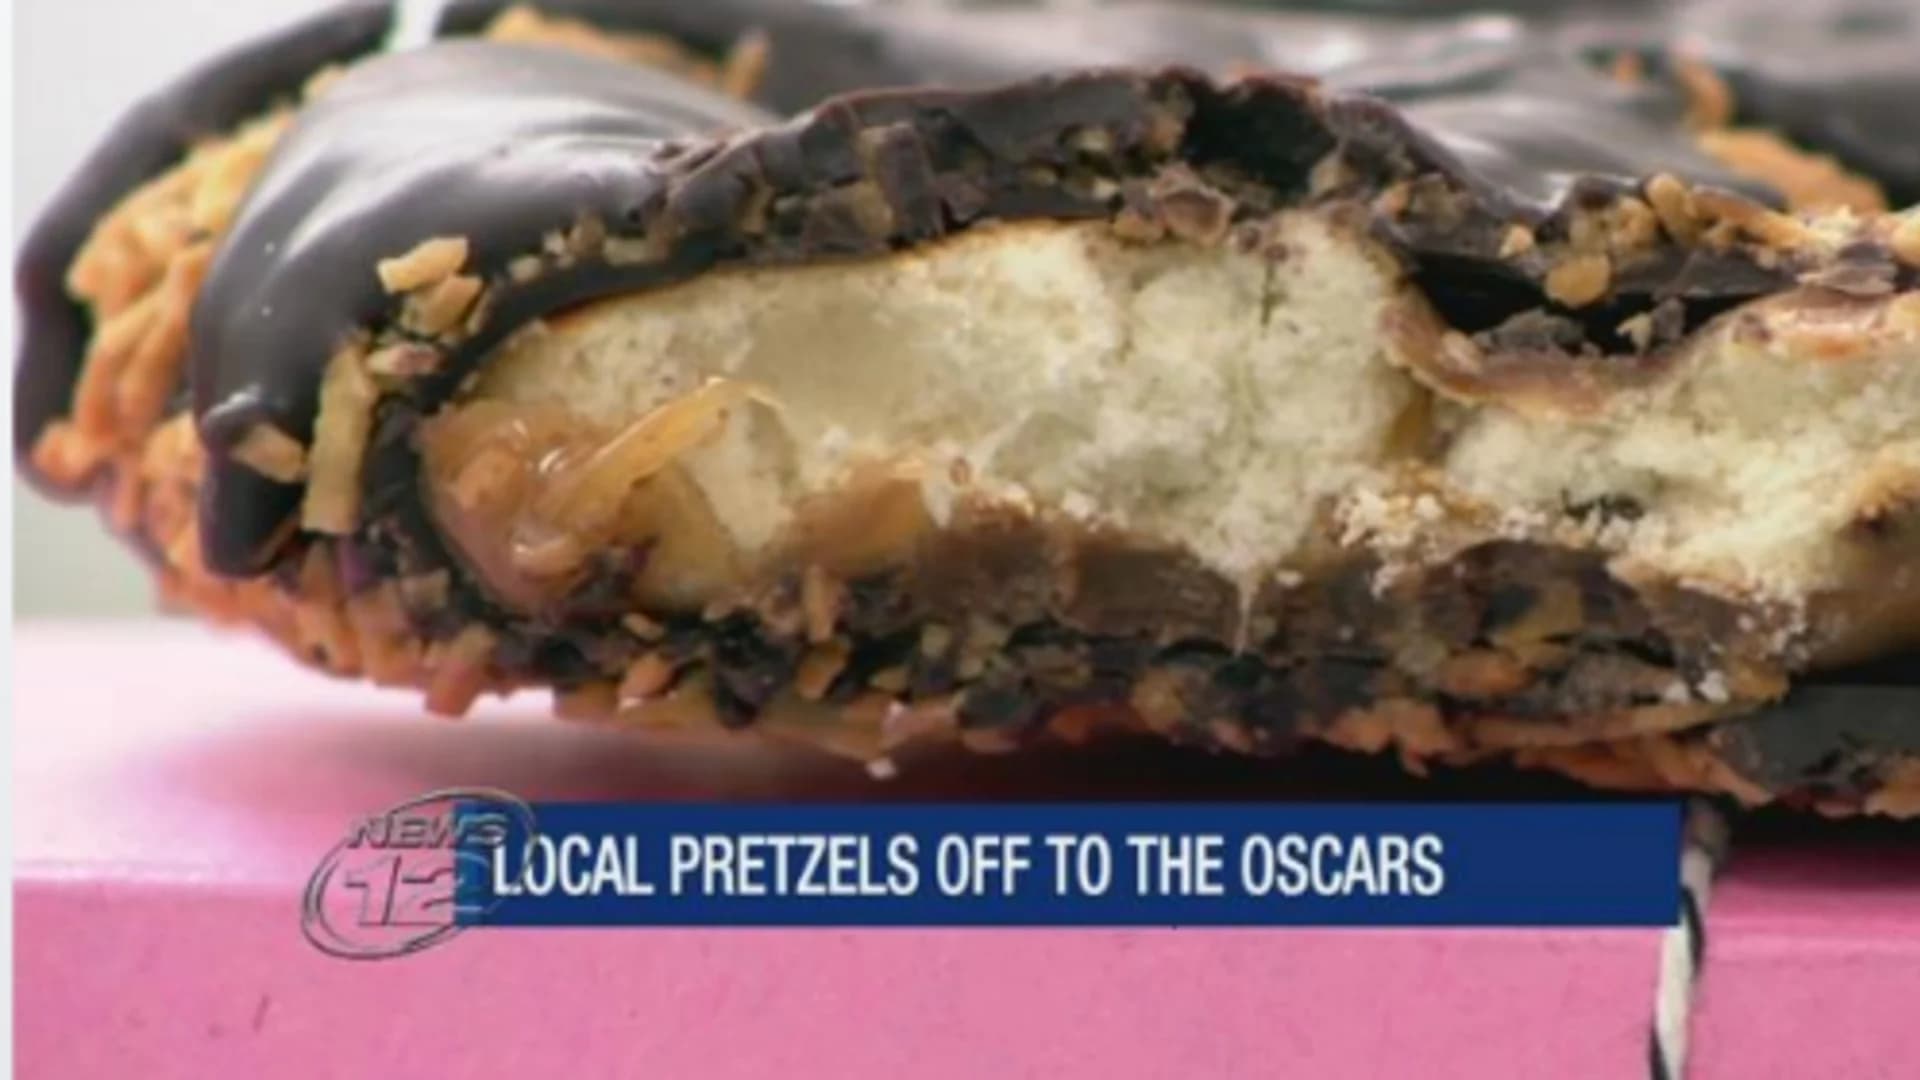 And the Oscar goes to...Tarrytown-based Posh pretzels